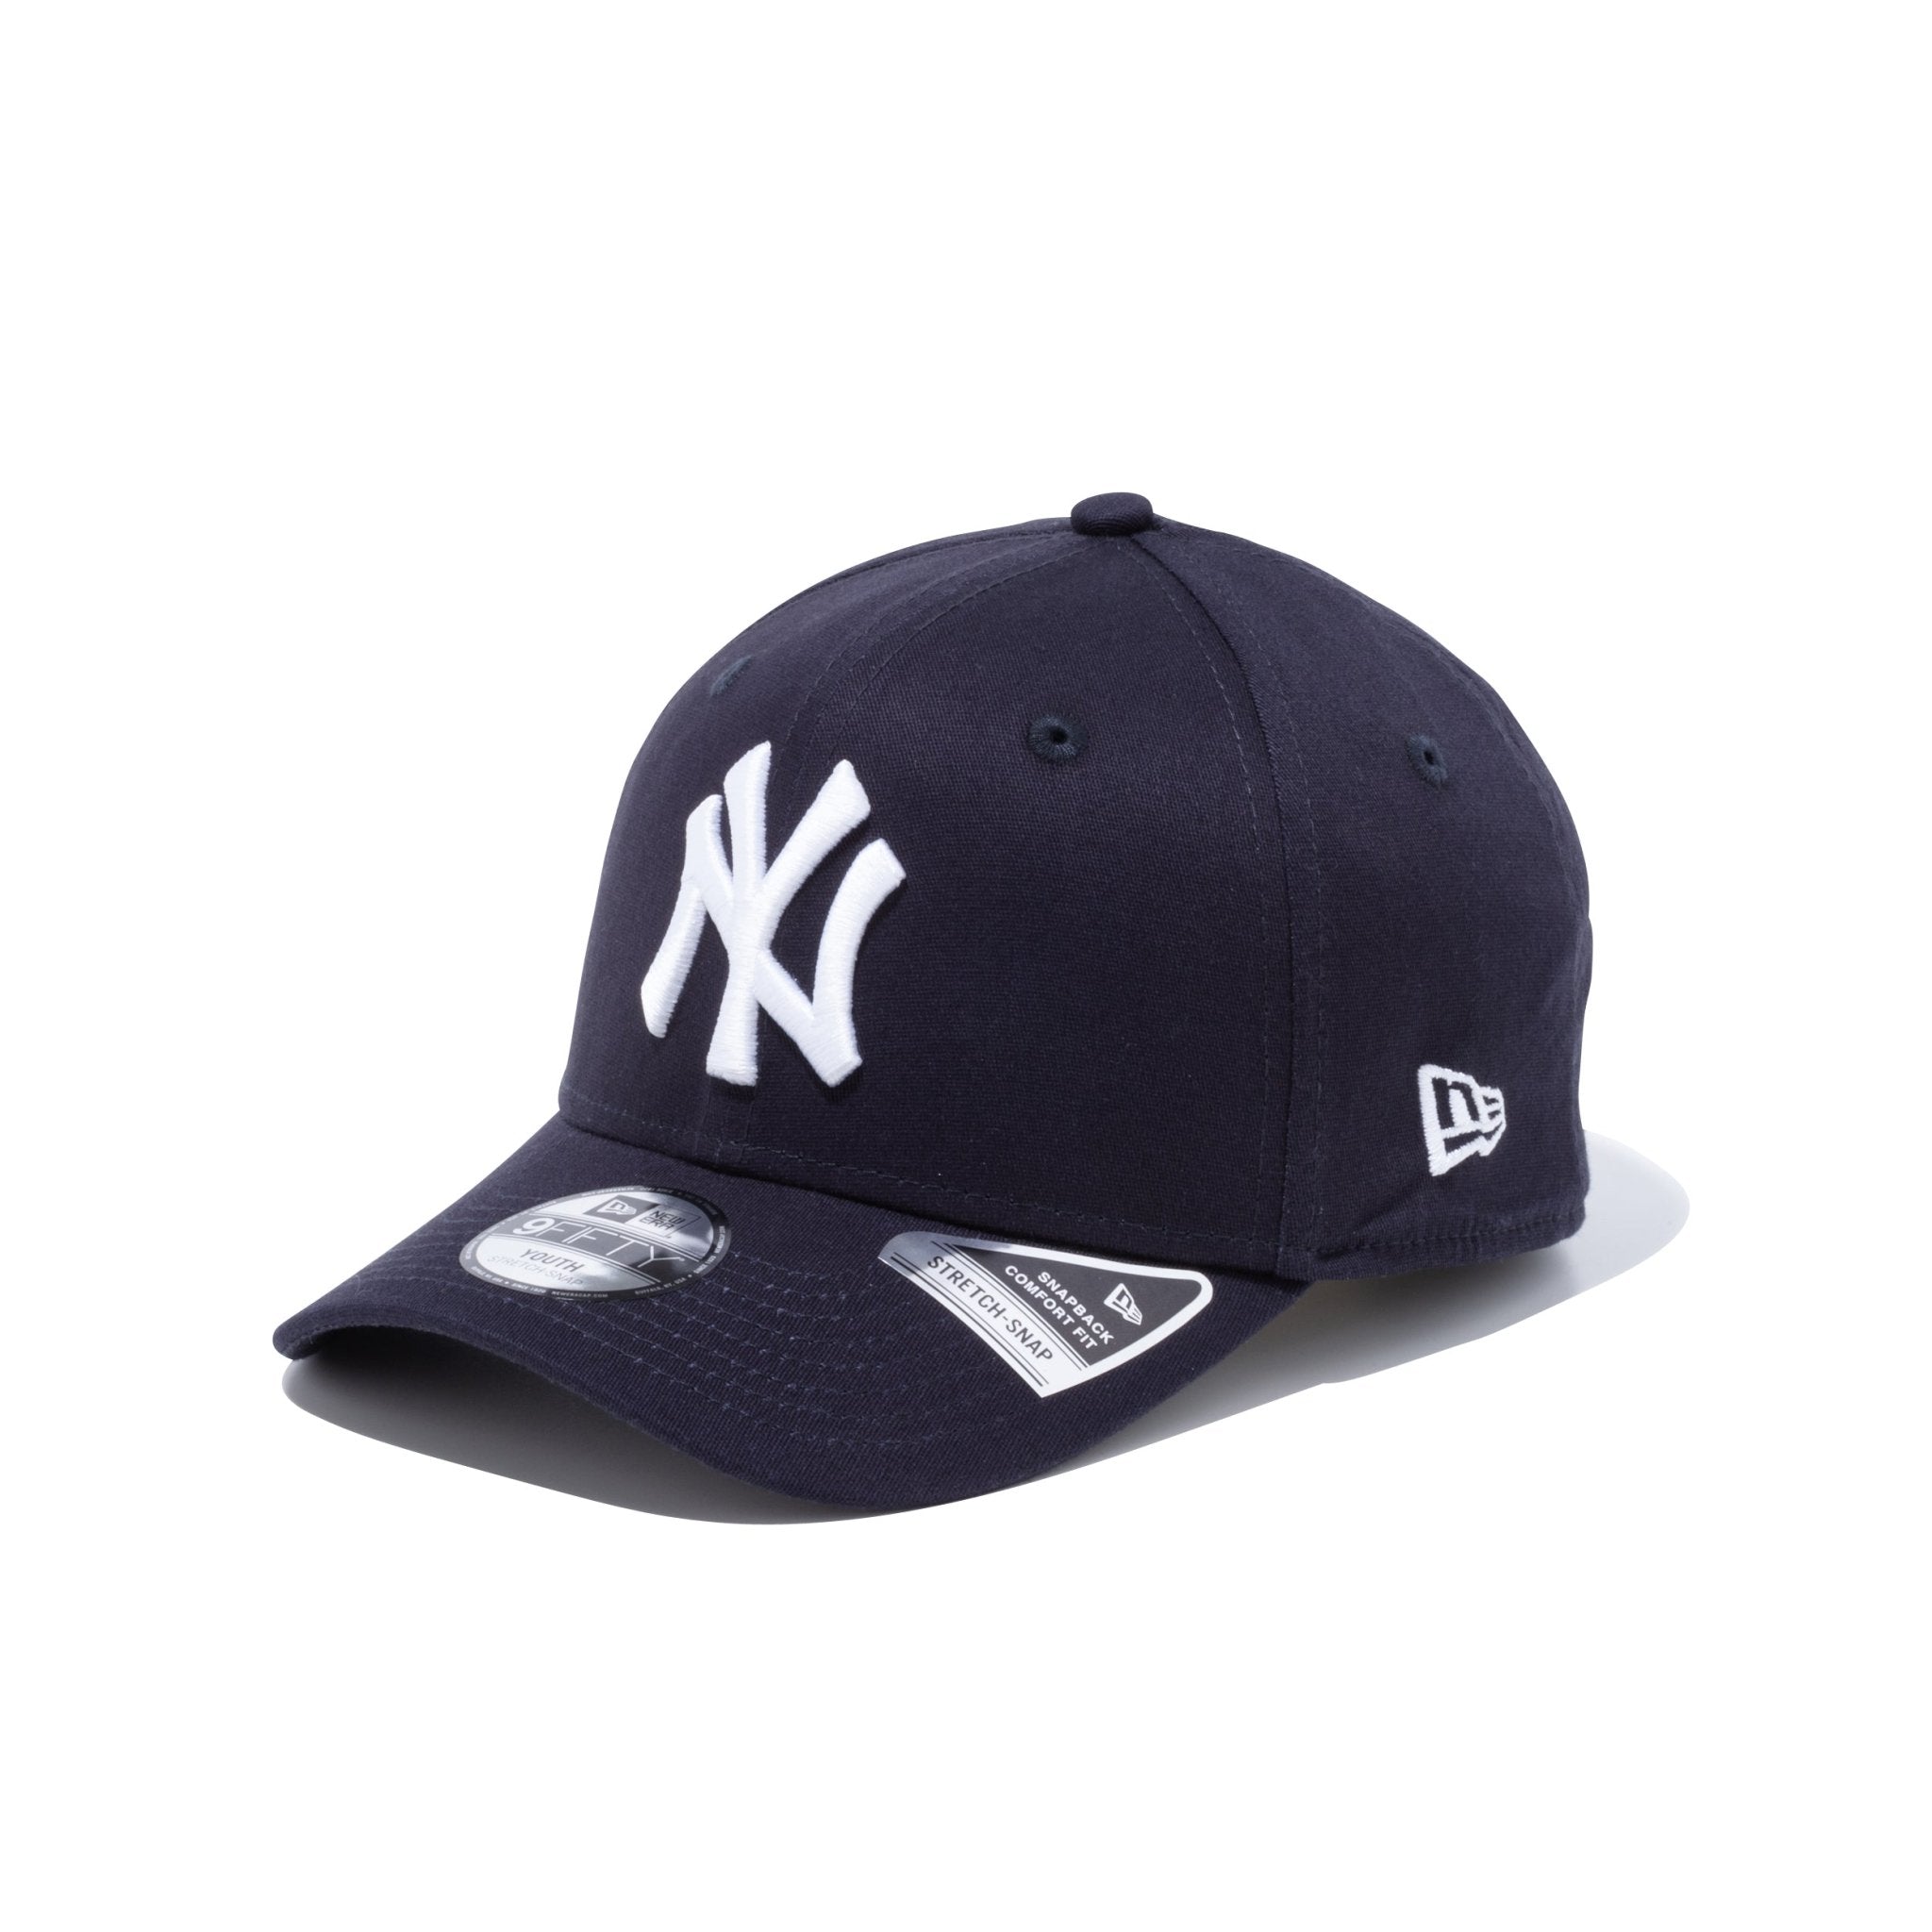 Youth 9FIFTY ストレッチスナップ ニューヨーク・ヤンキース